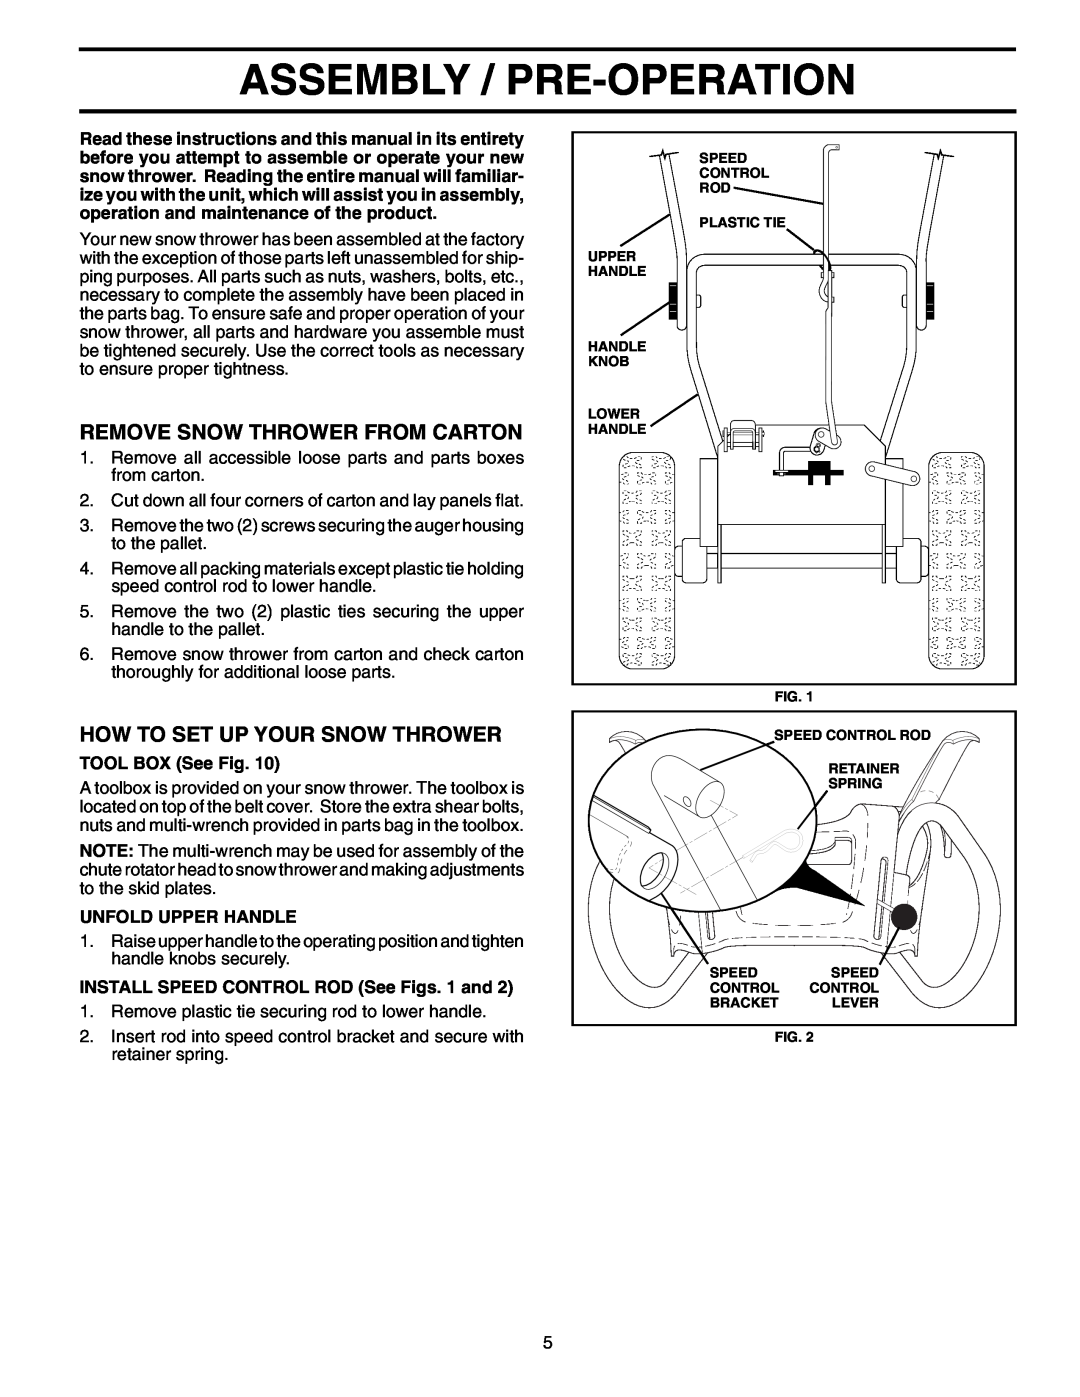 Poulan 199600 owner manual Assembly / Pre-Operation, Remove Snow Thrower From Carton, How To Set Up Your Snow Thrower 